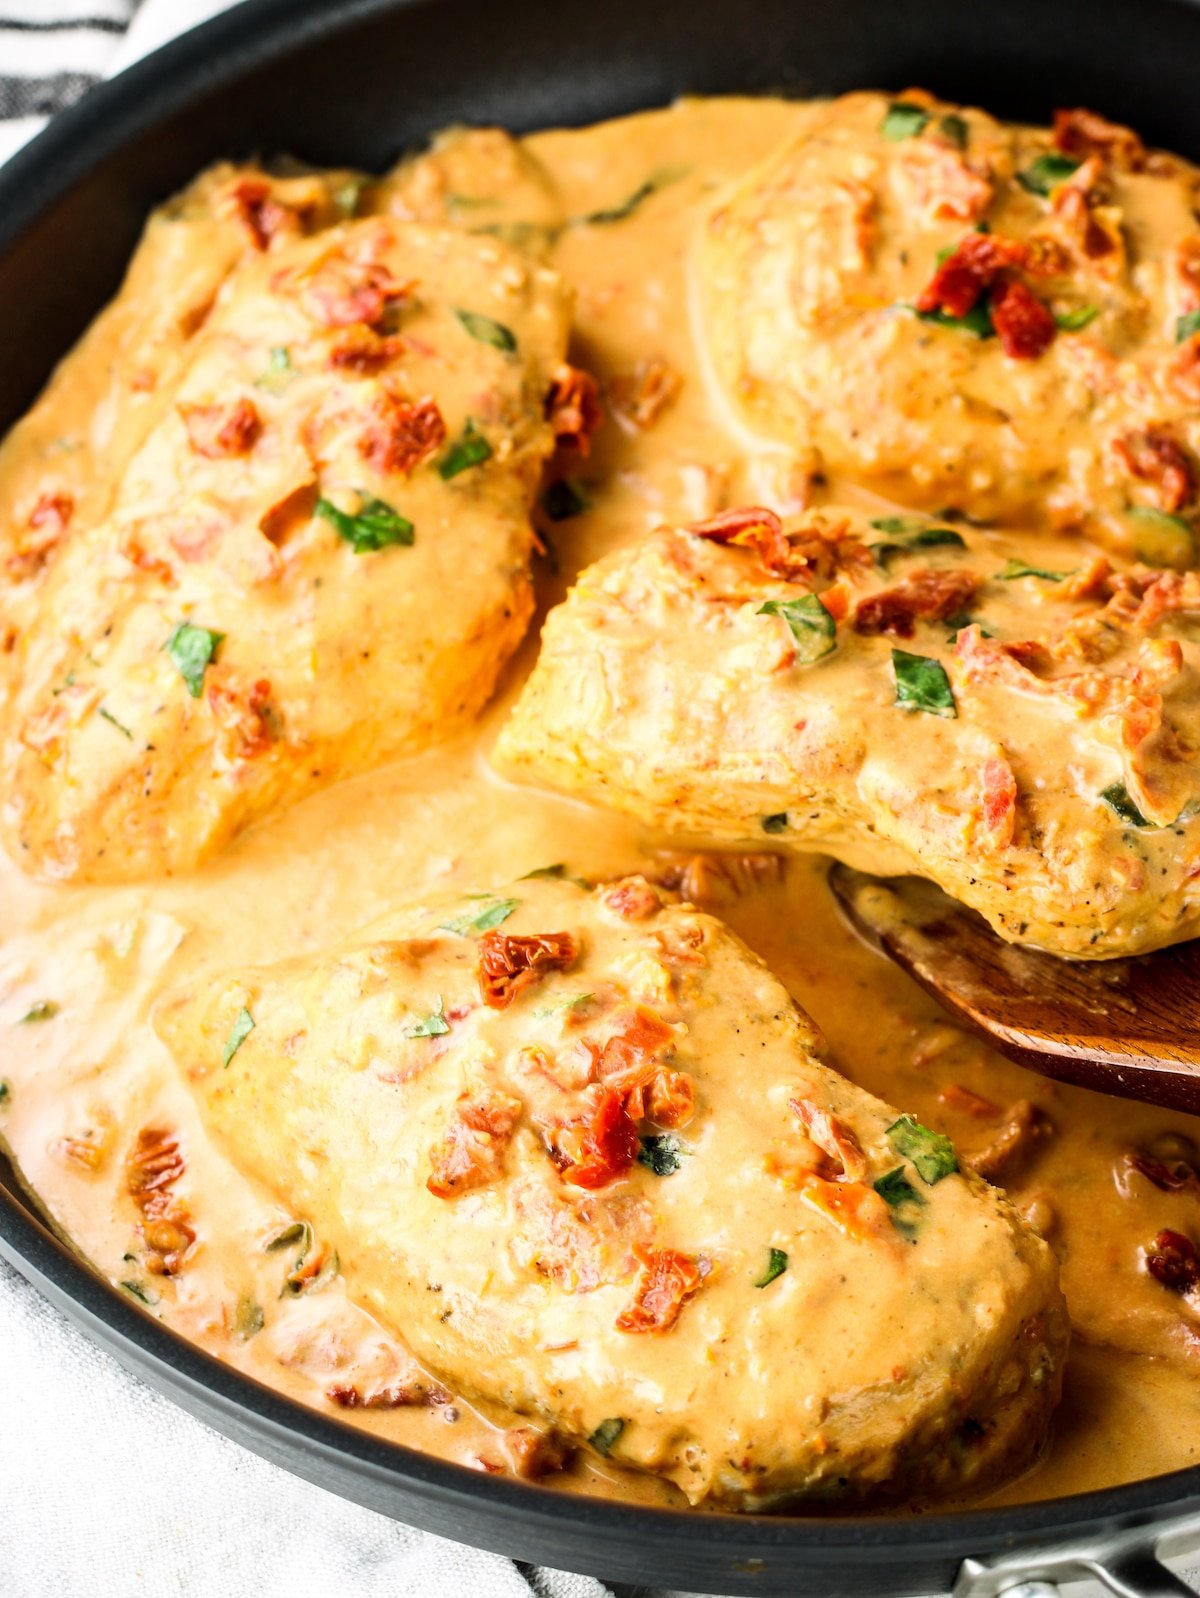 A close-up photo of chicken breasts in a creamy sun-dried tomato sauce.